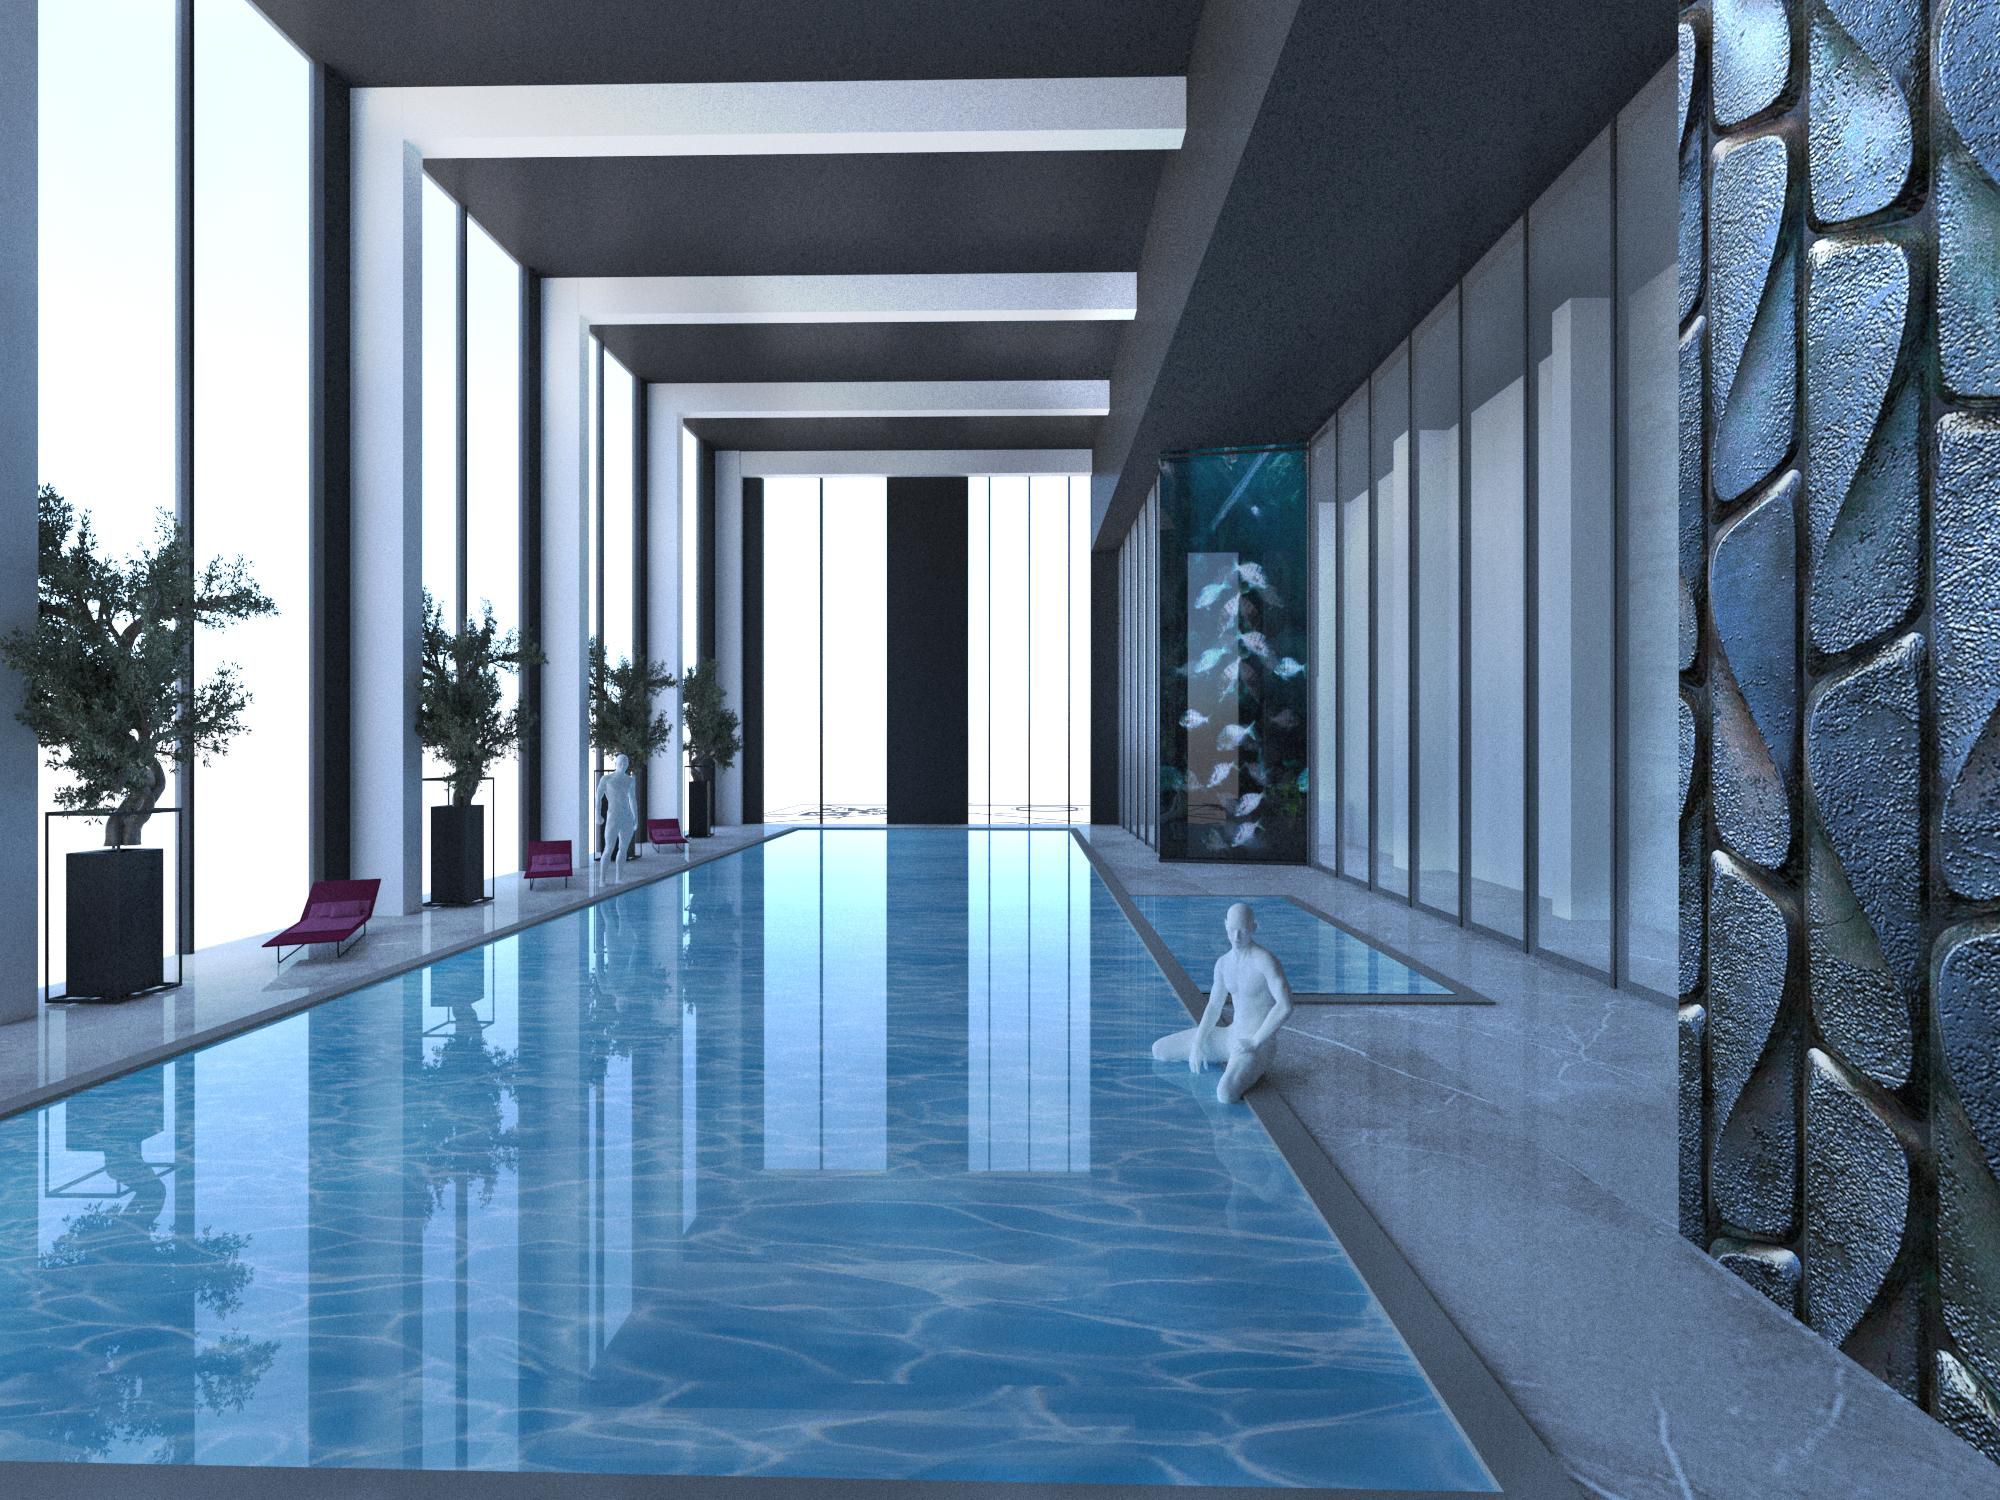 The finest leisure club in Sofia has a 19-metre indoor pool with separate children’s pool, hot tub, sauna, steam room, large gym, a series of tranquil treatment rooms with a range of pampering spa treatments, such as aroma therapies and massages and a beauty salon.